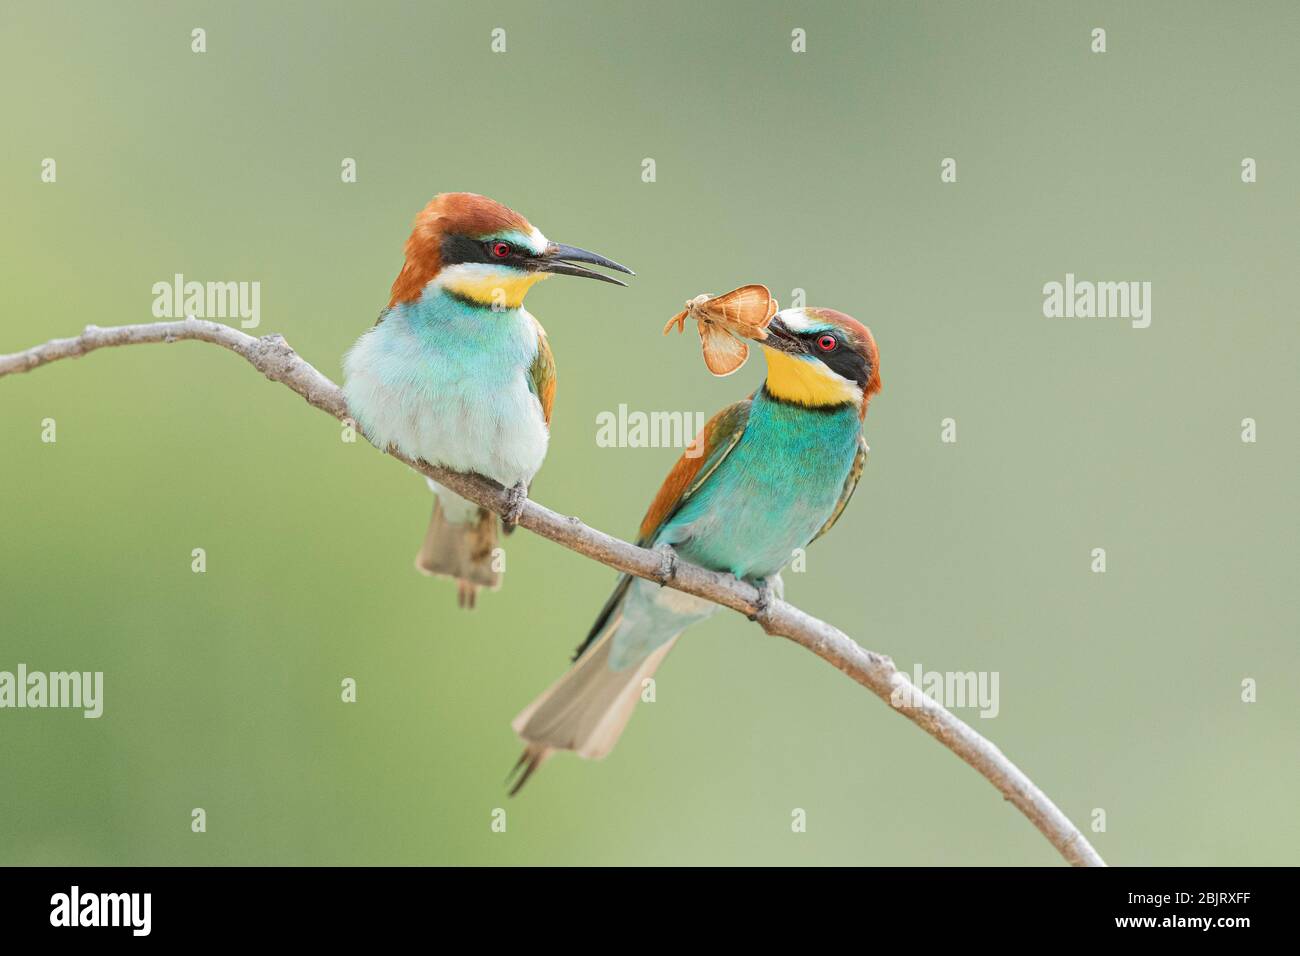 A European bee-eater (Merops apiaster) courting a female by passing her an insect, Bulgaria Stock Photo